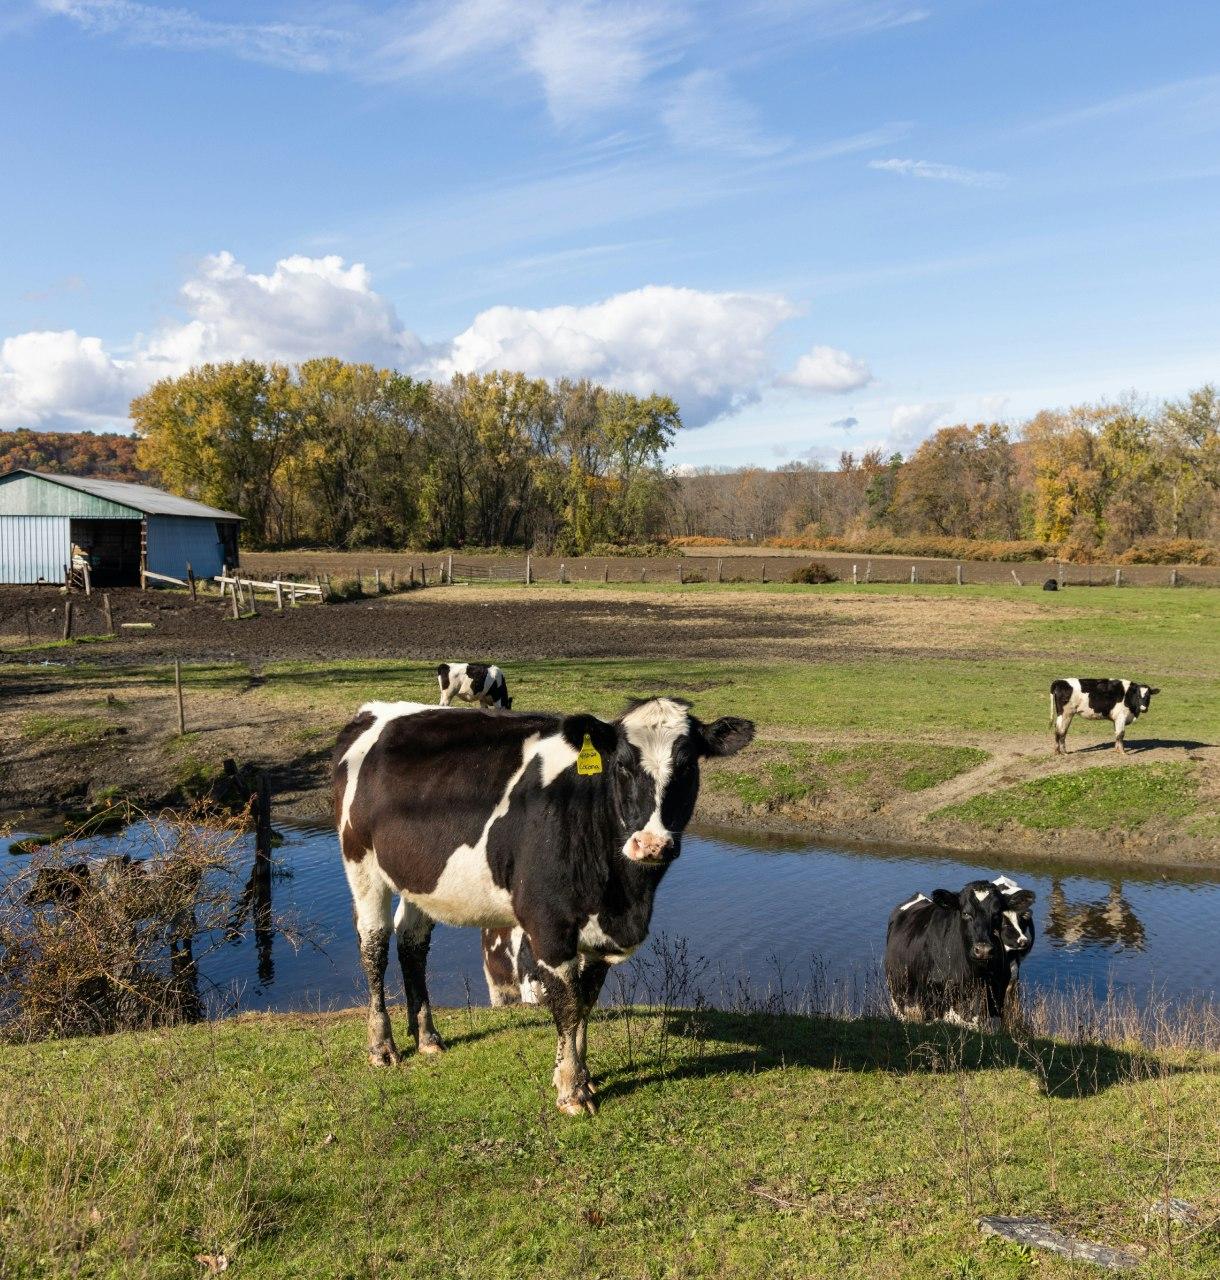 Dairy cows on a farm that practices manure management in regenerative agriculture